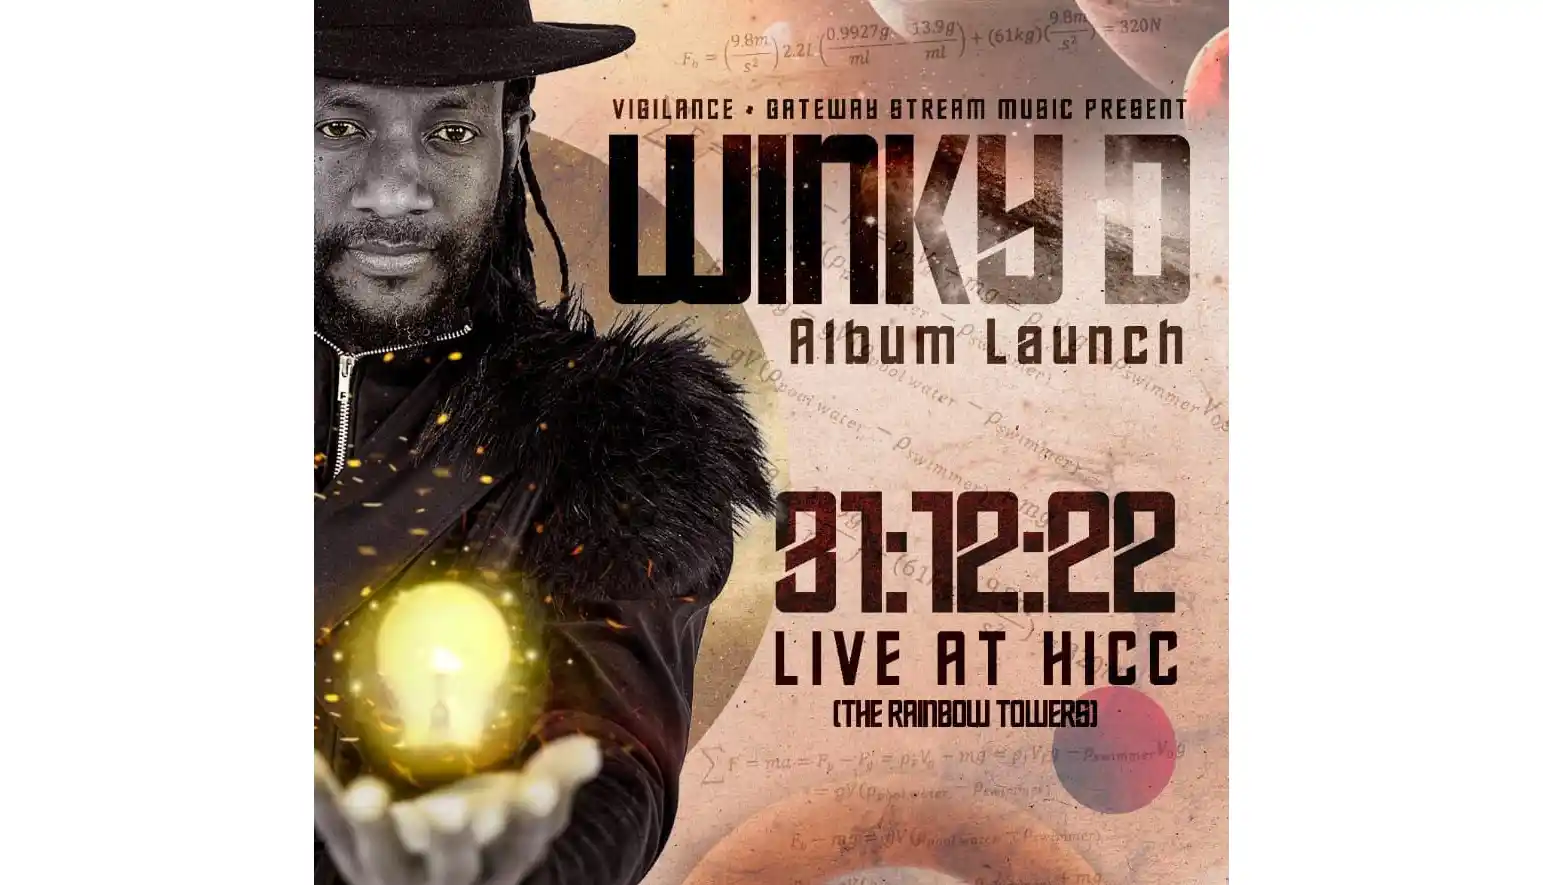 Winky D album launch HICC | All the information you need